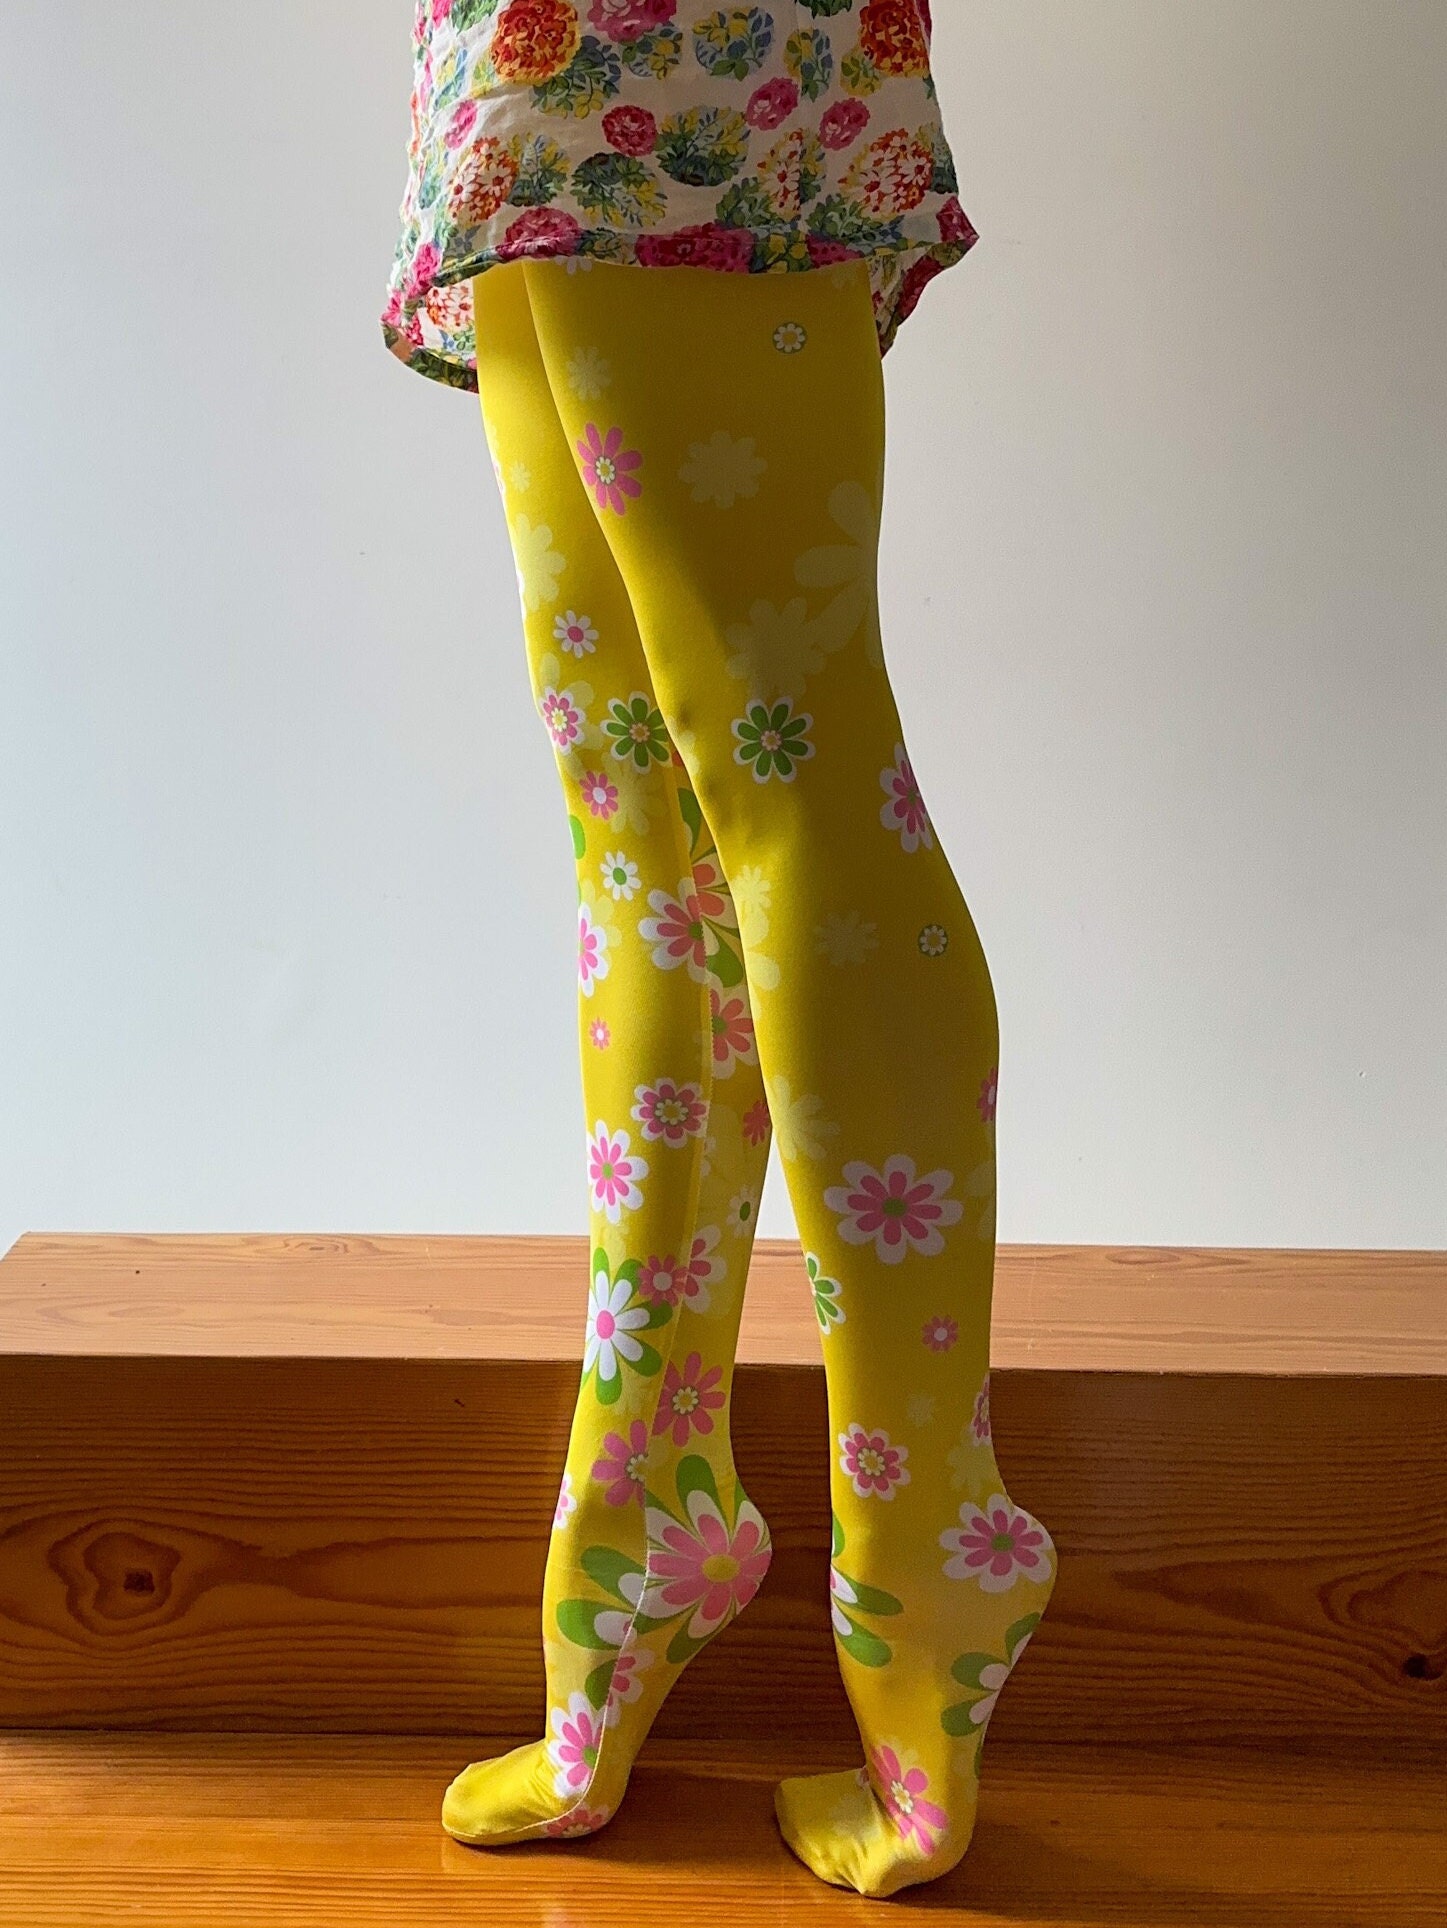 Yellow Sunny Fields Asymmetrical Retro Mod Tights 1960s-1970s Hippie Vintage-inspired  Printed Footed Tights Retro Accessories XS-5X 